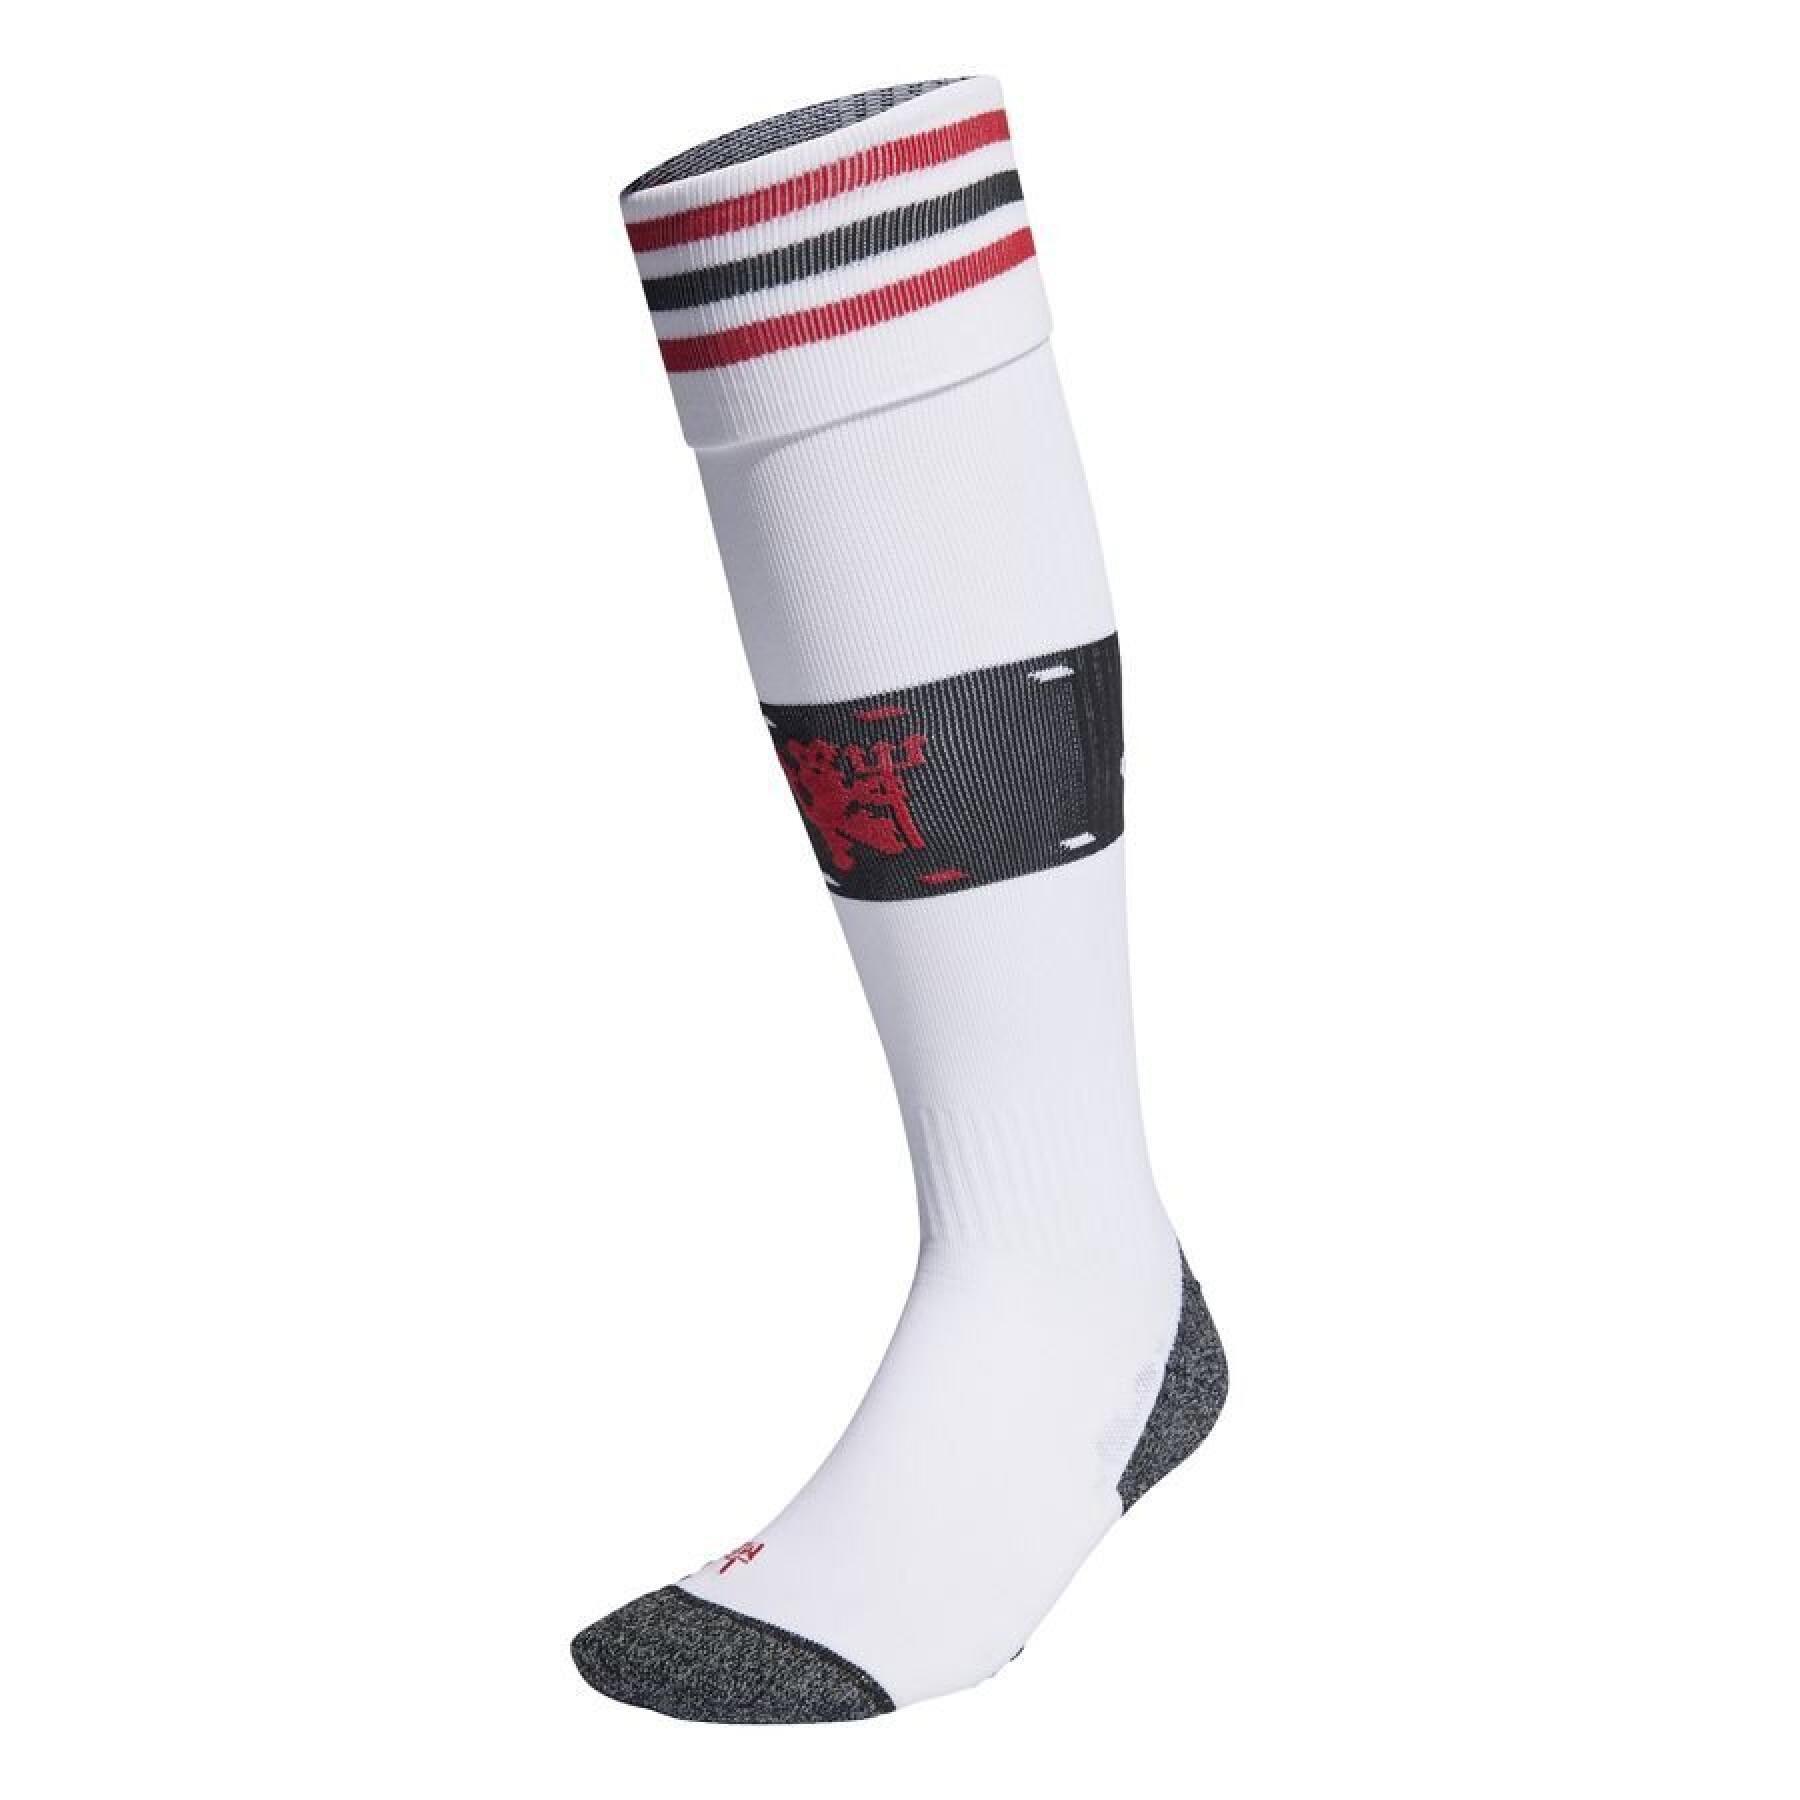 Outdoor socks Manchester United 2022/23